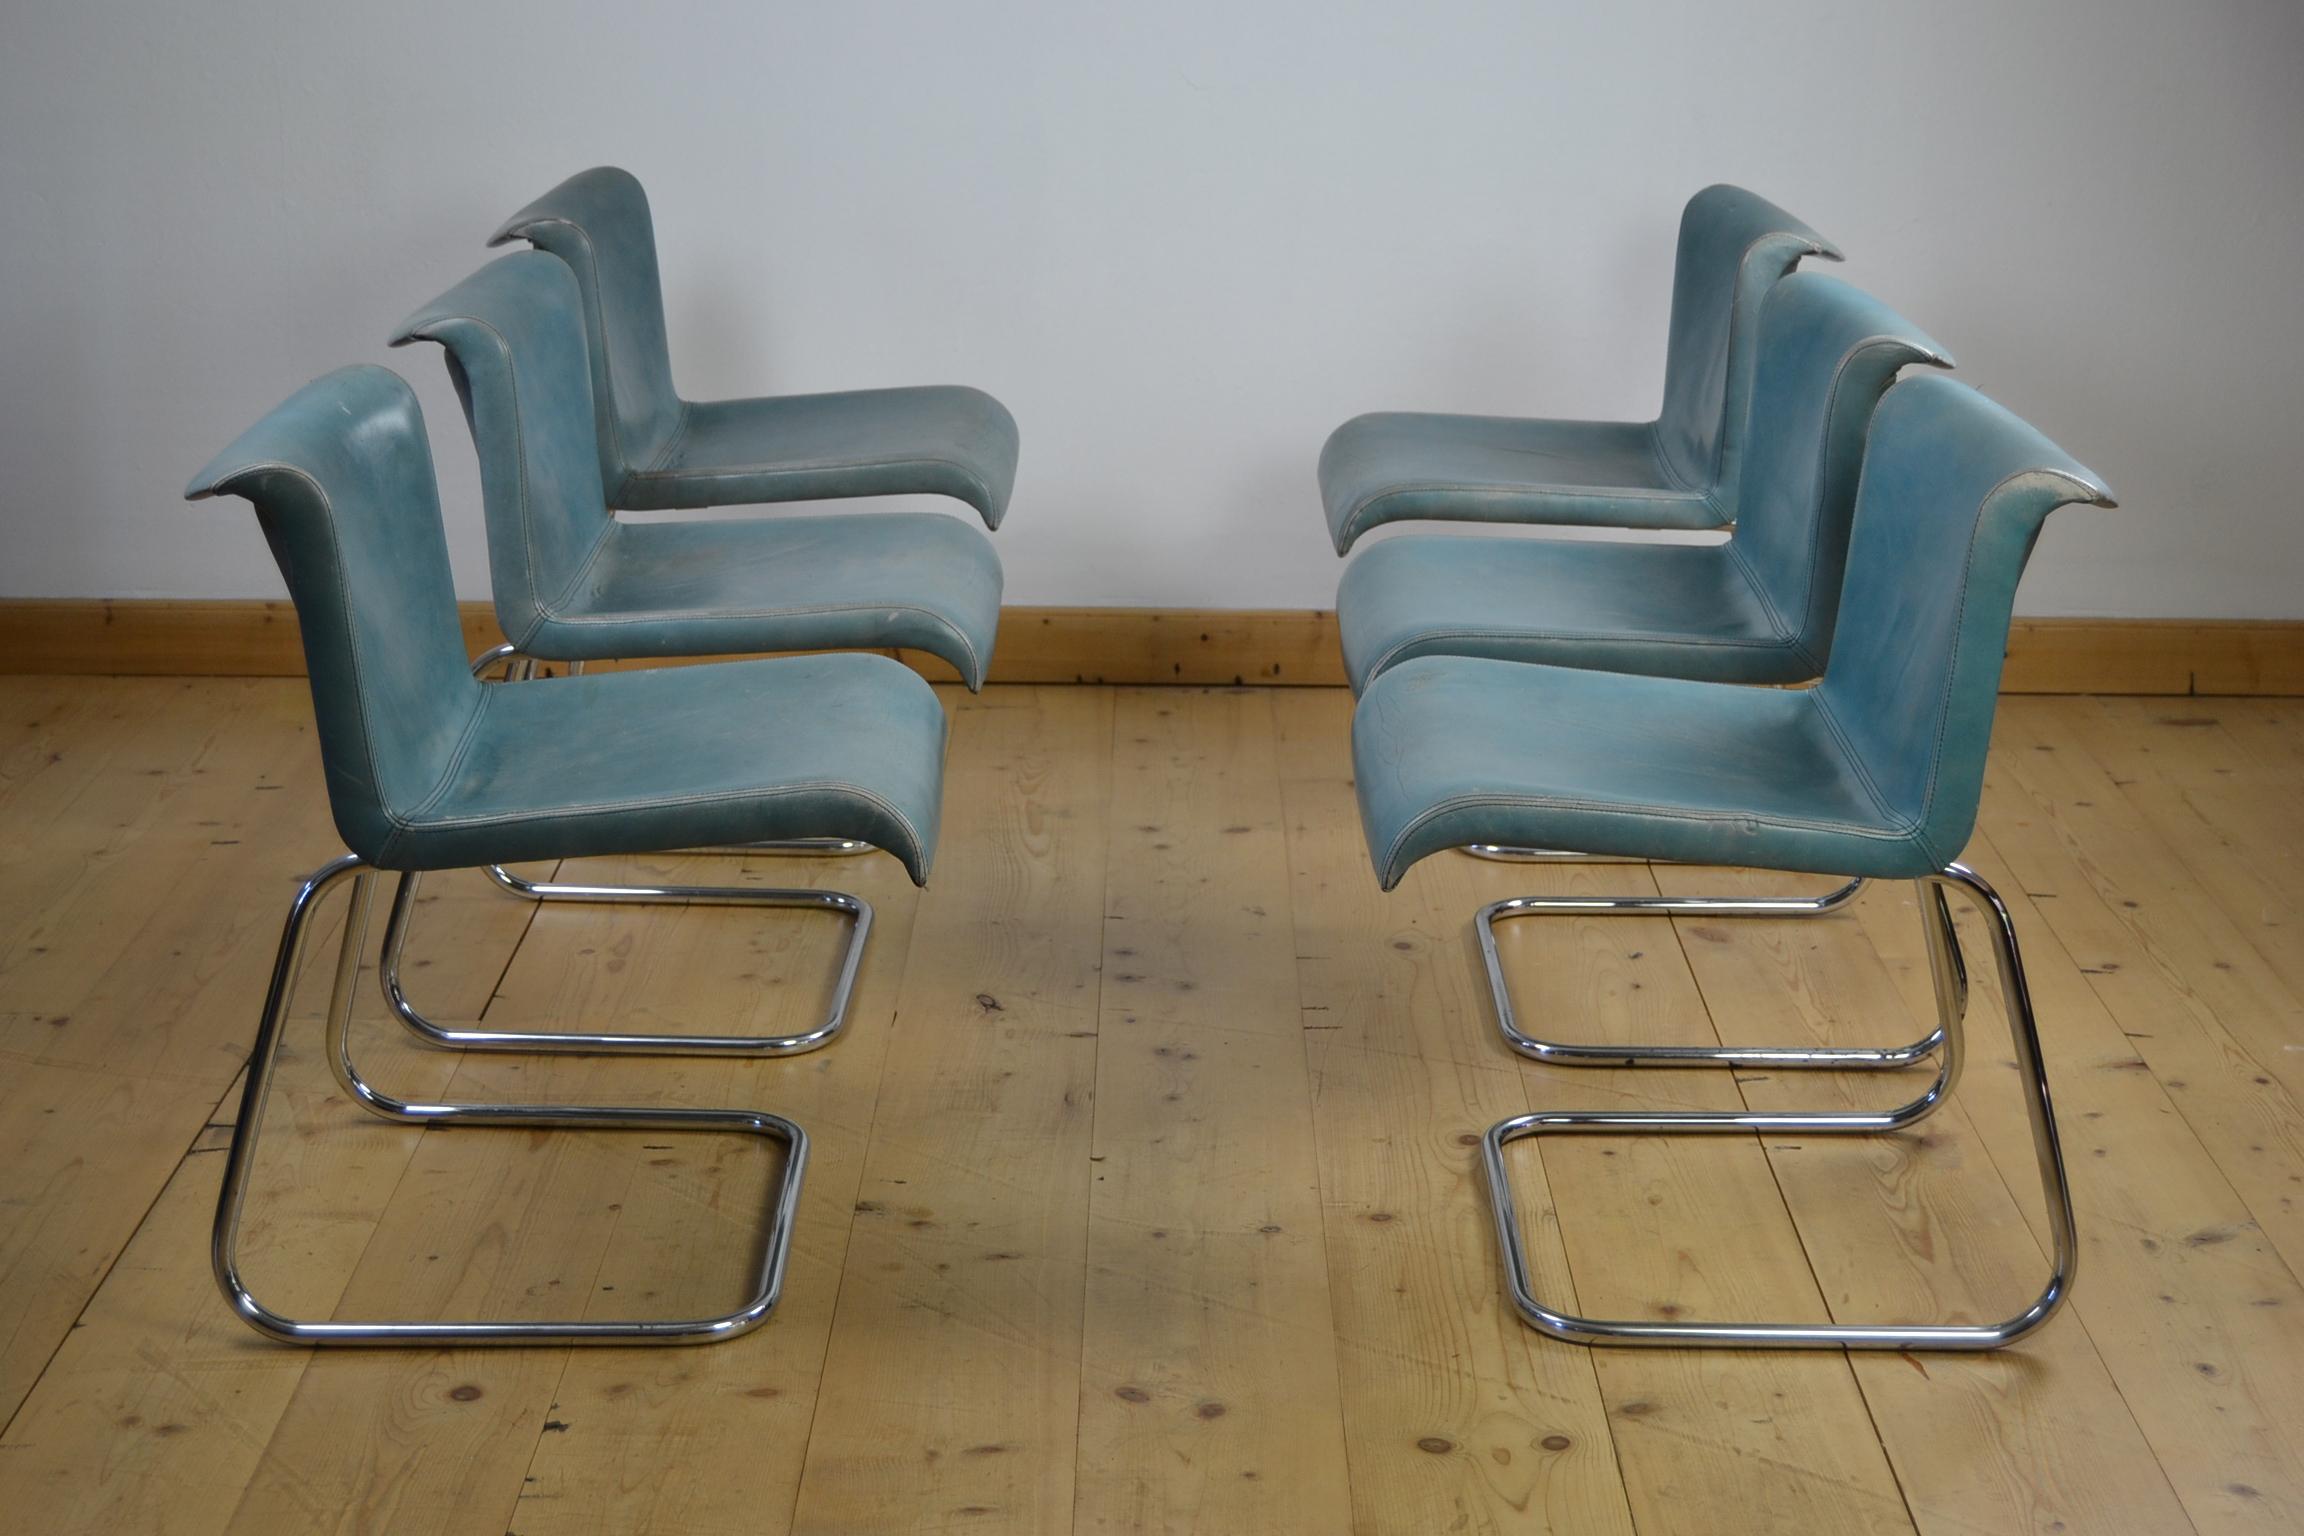 Vintage Mid-Century Modern Set of 6 Leather Dining Chairs.
These 1970s Leather Chairs are covered with Blue Leather and have Chromed Bases.
Due the shape of the frame, the chairs wiggle a little what makes them sit comfortable.
The leather has a